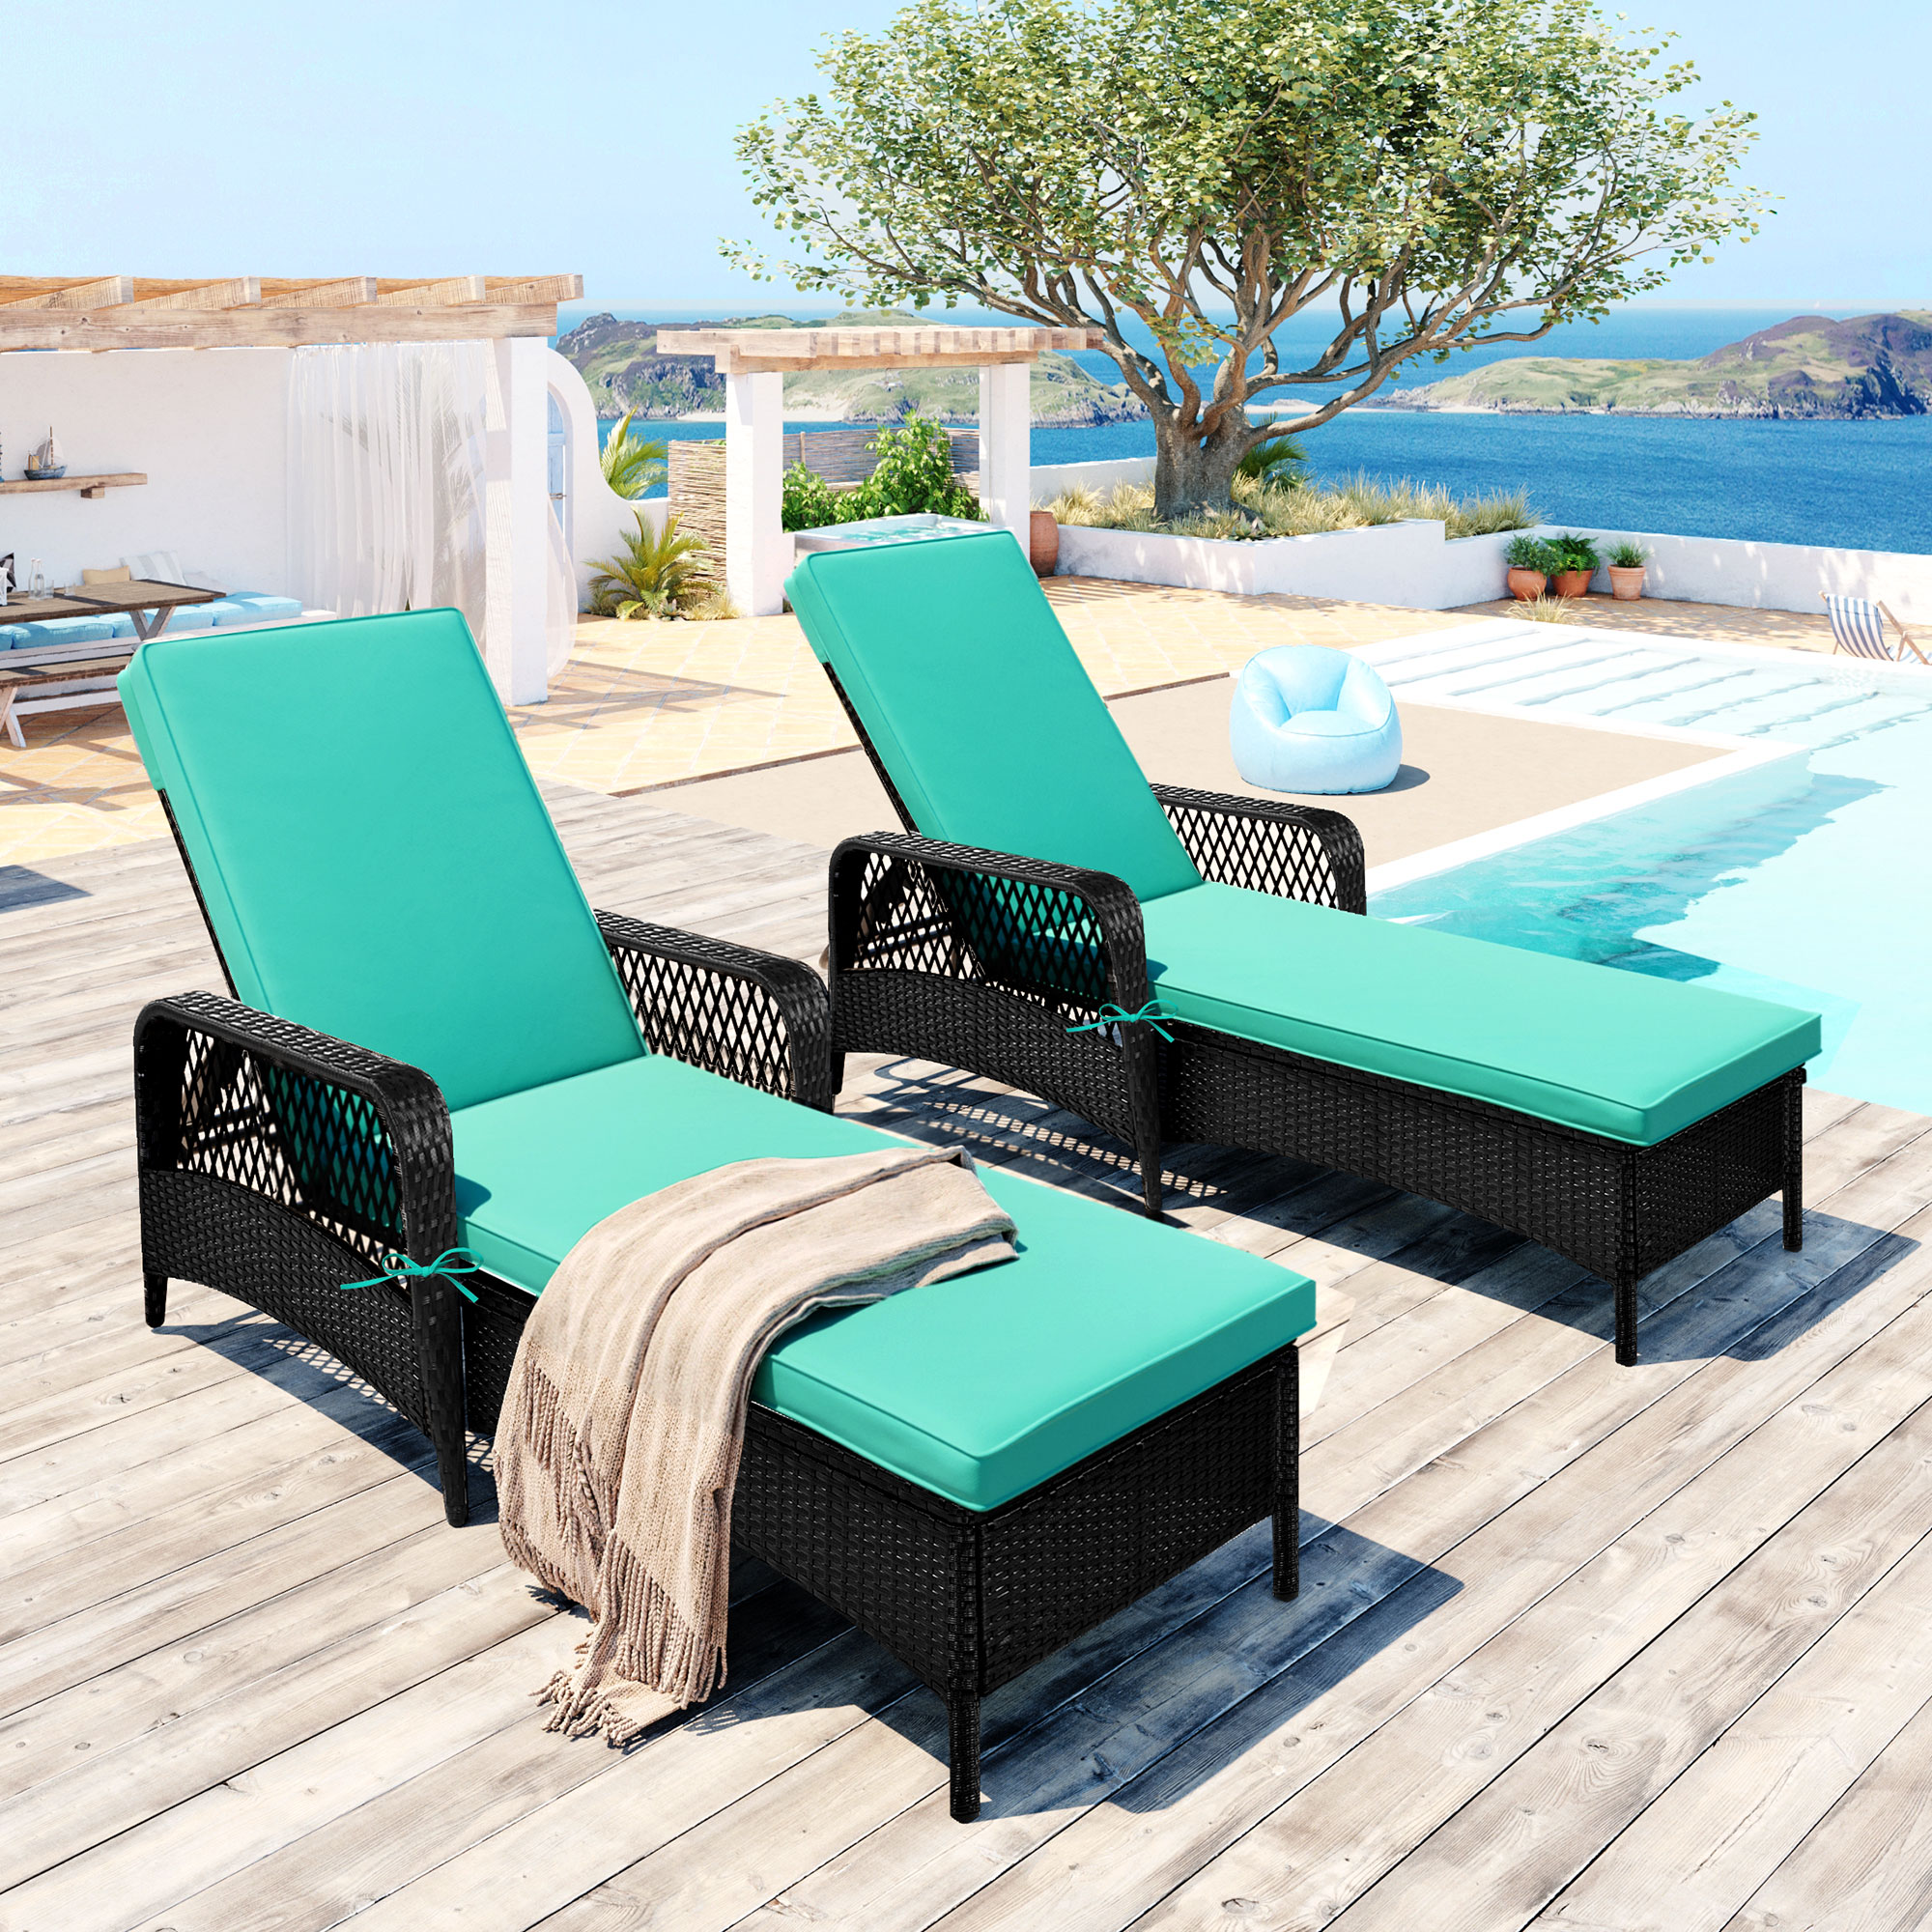 ENYOPRO 2 Piece Outdoor Patio Chaise Lounge Set, PE Wicker Lounge Chairs with Adjustable Backrest Recliners, Reclining Chair Furniture Set with Cushions for Pool Deck Patio Garden, K2701 - image 1 of 10